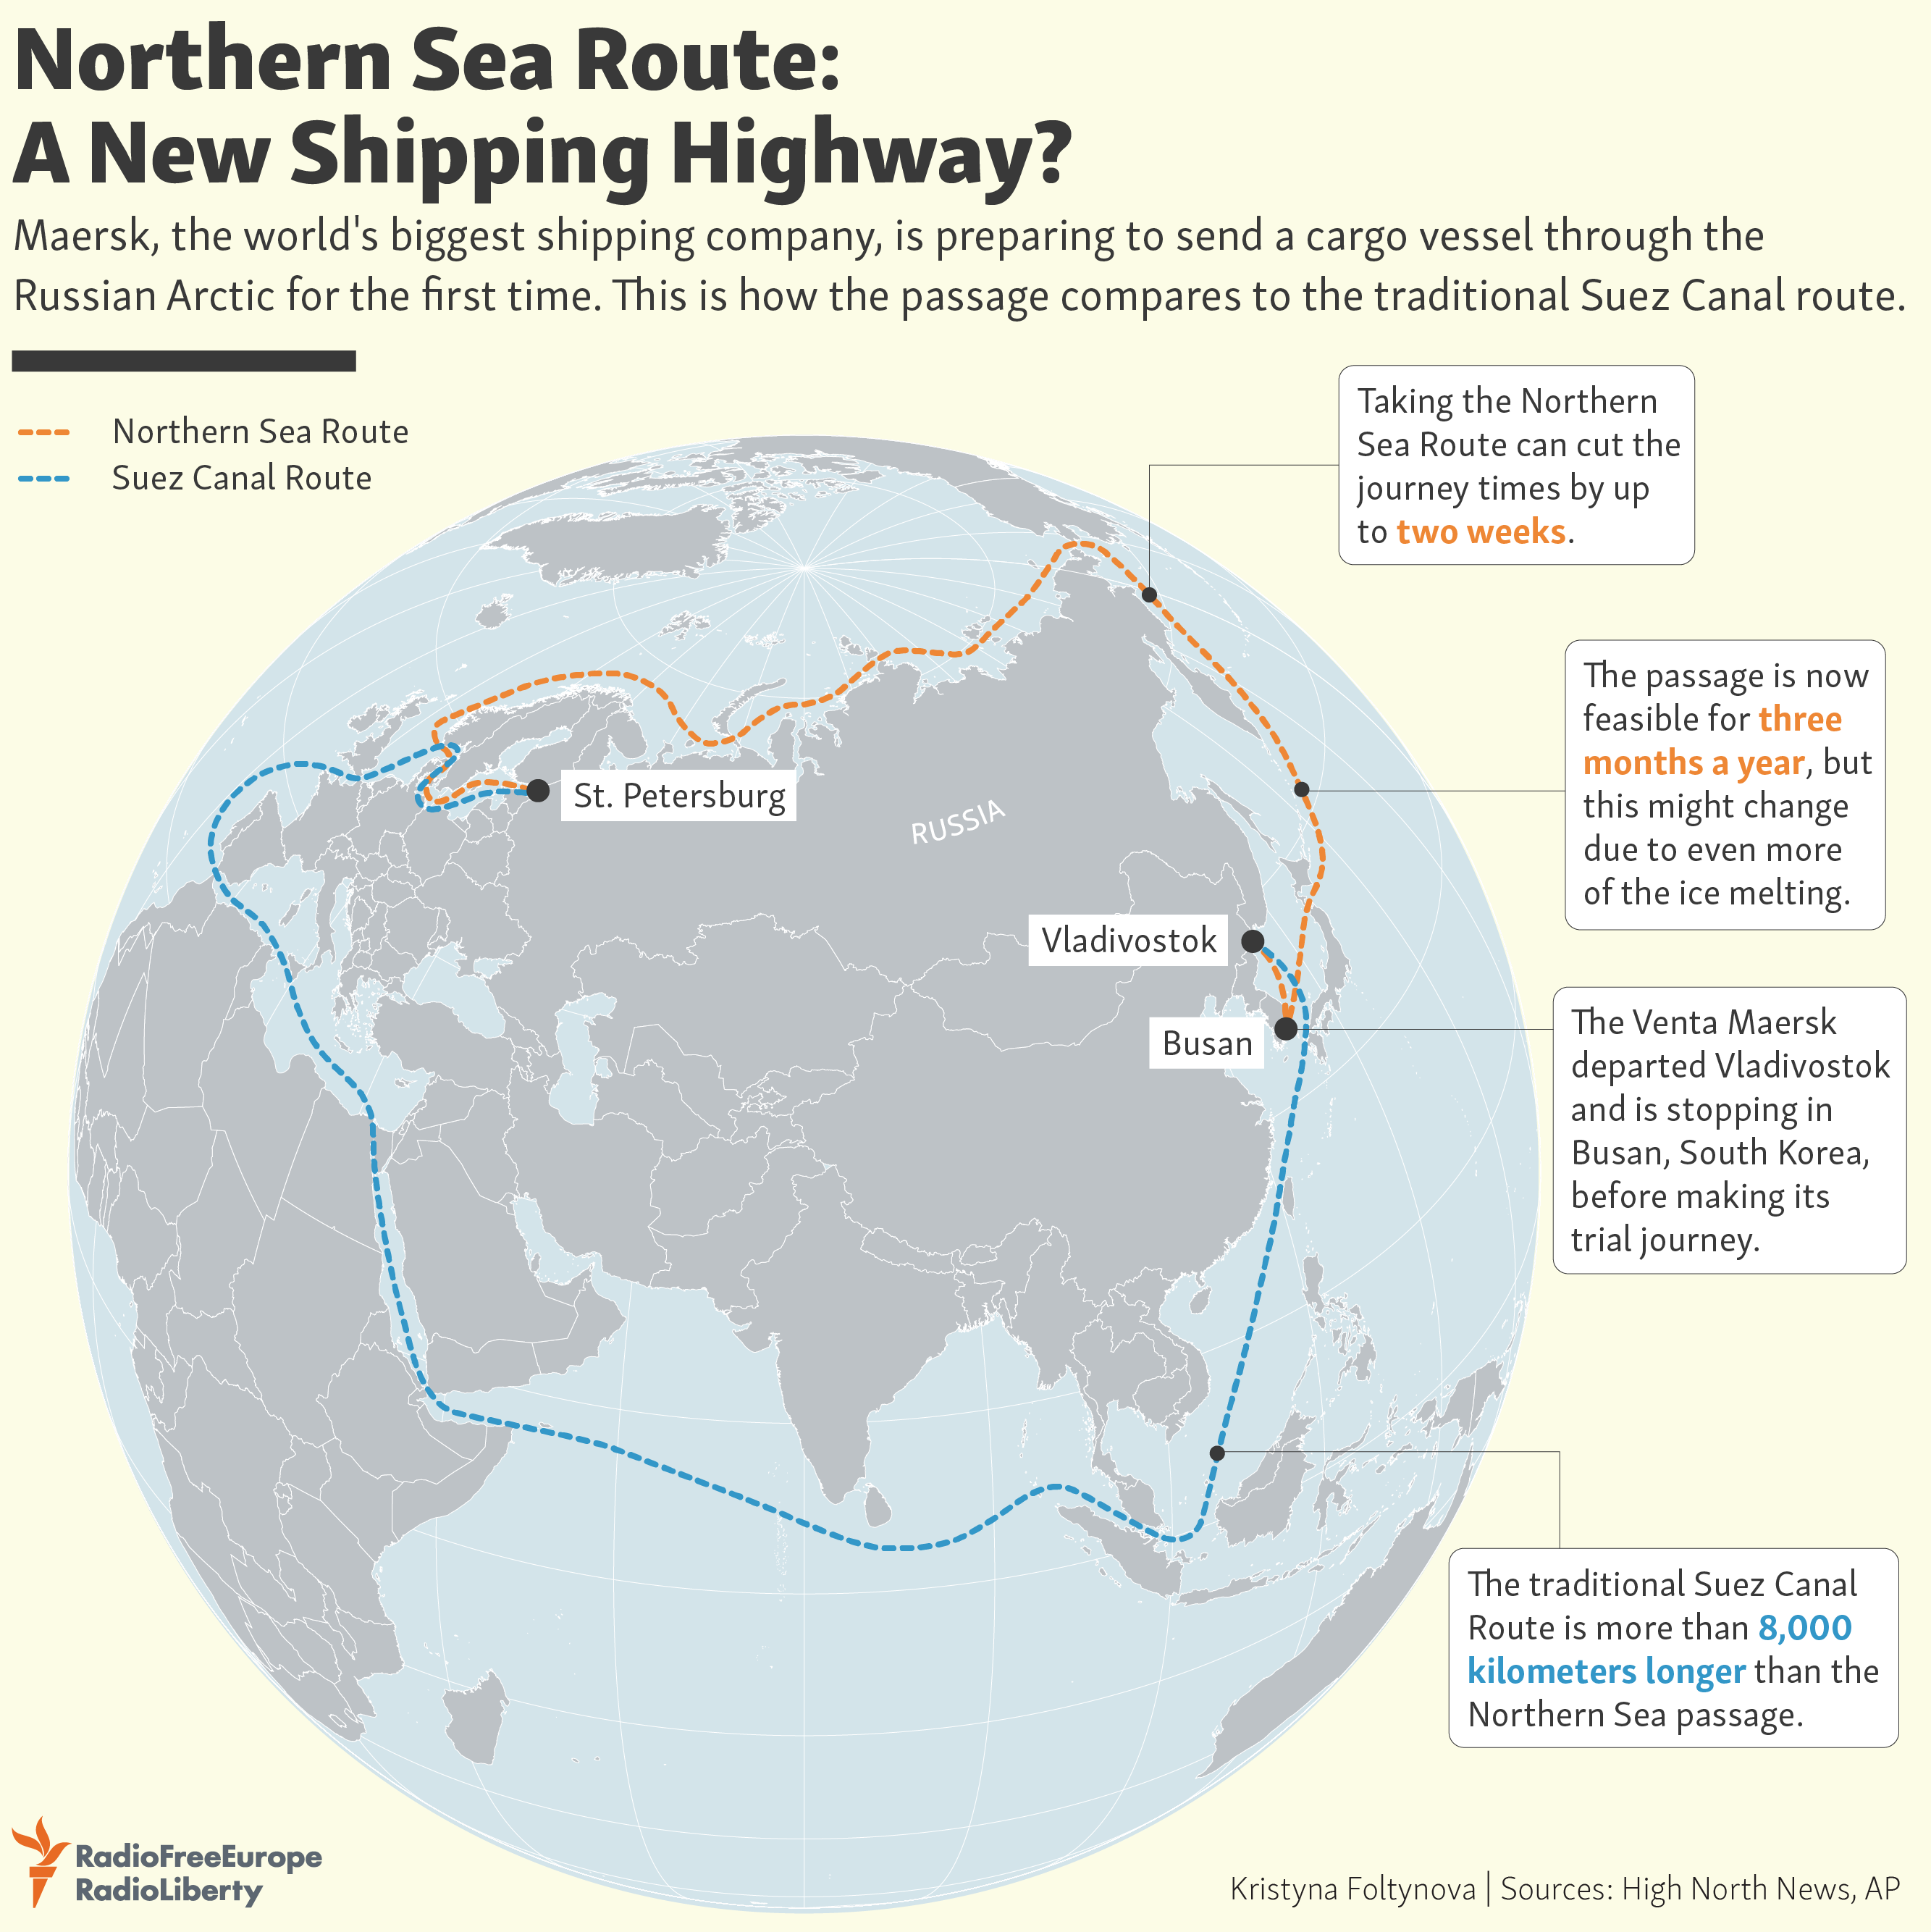 Northern Sea Route A New Shipping Highway?